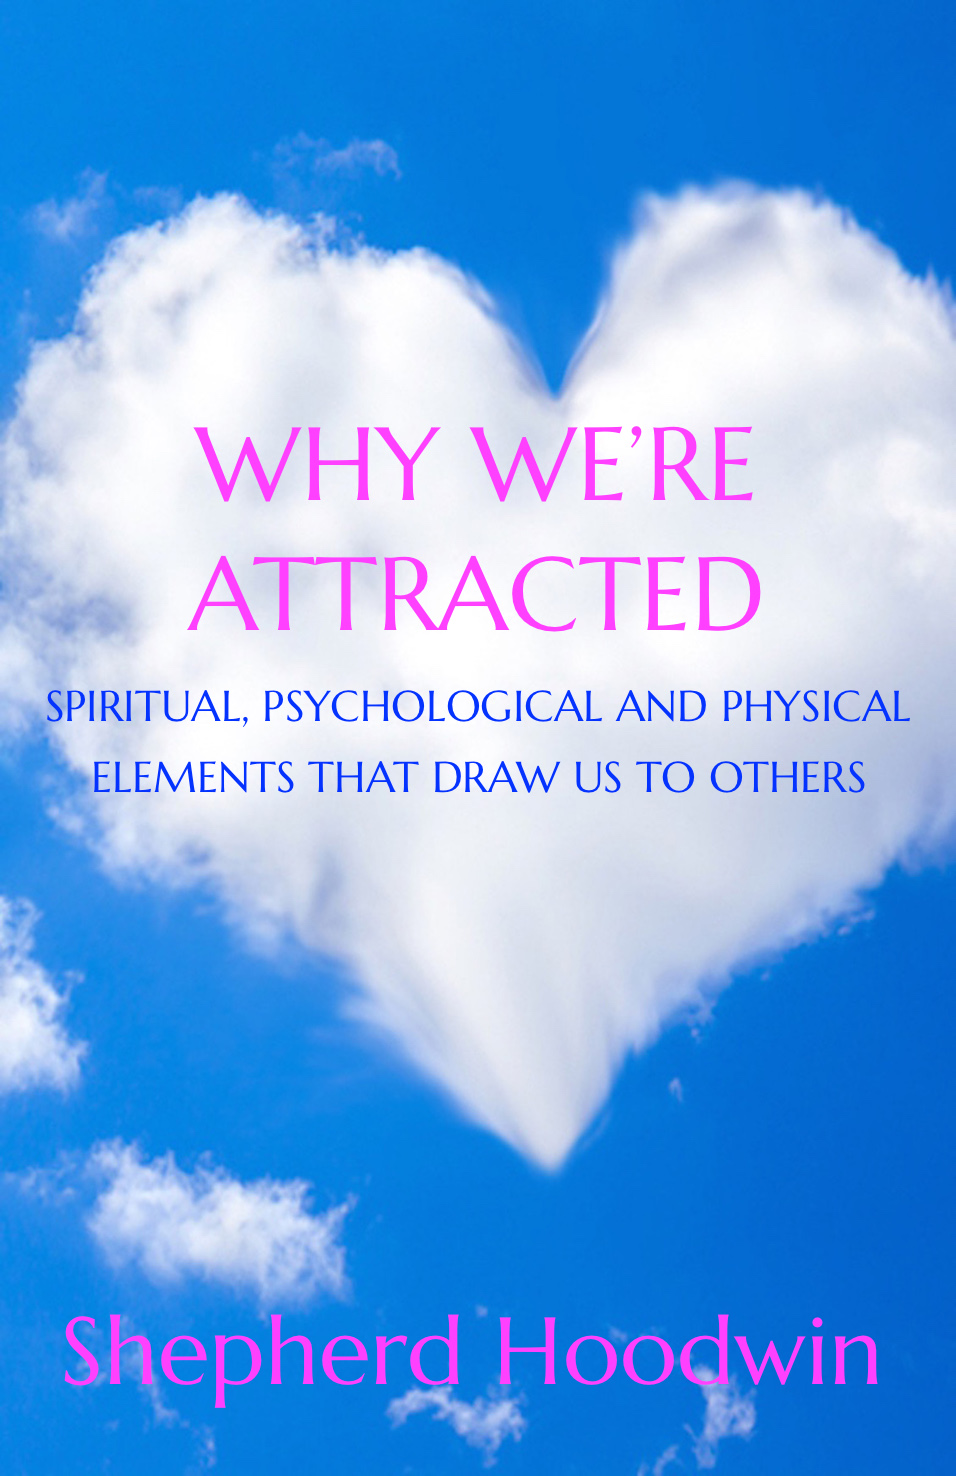 Why We're Attracted